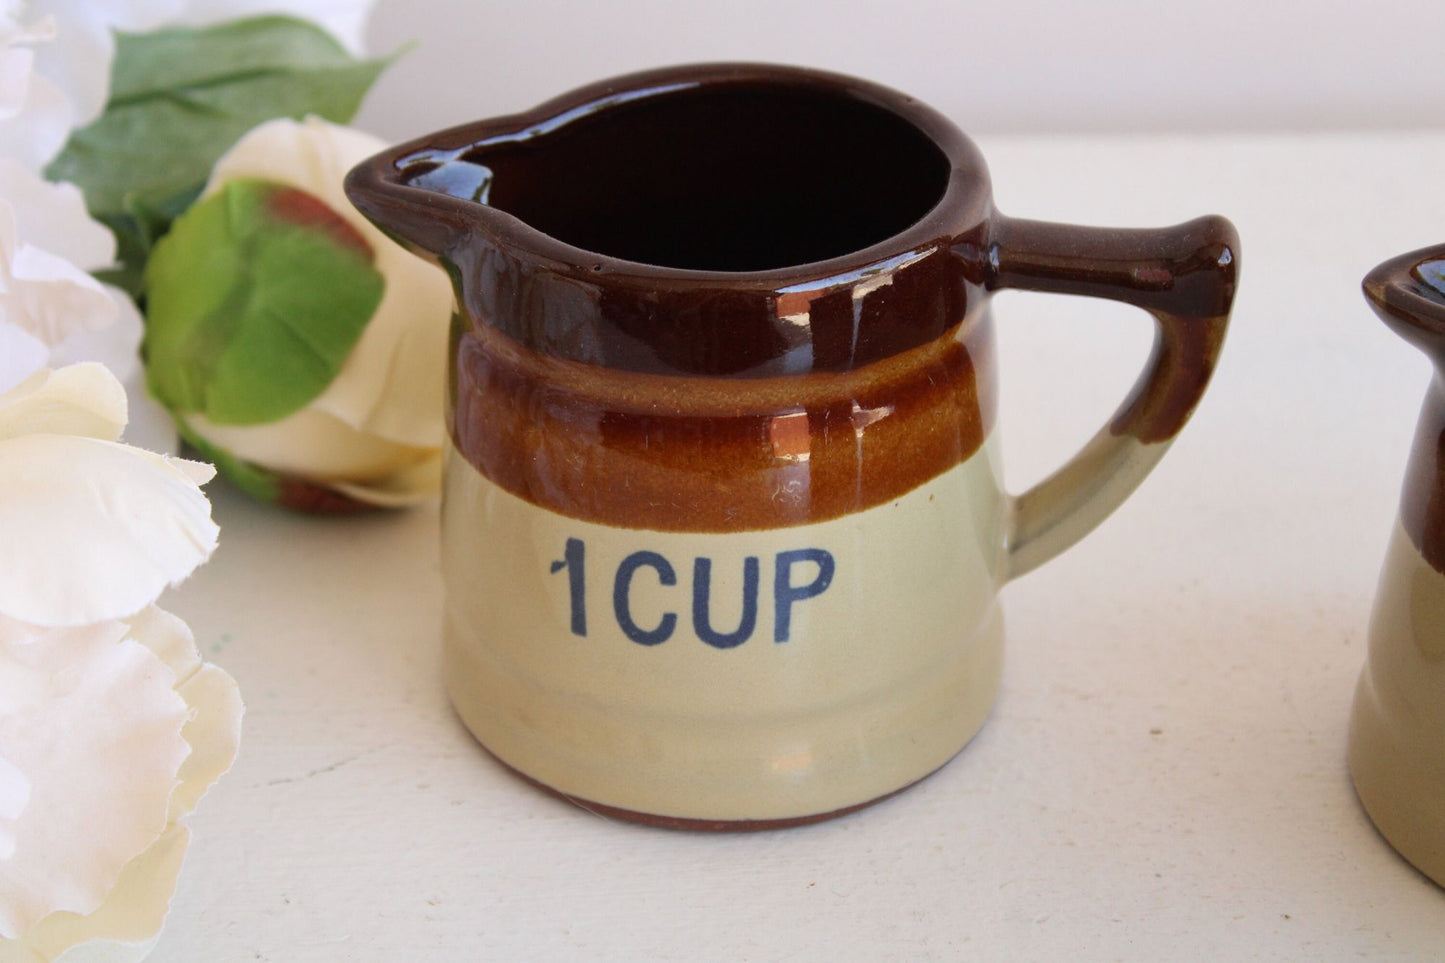 Vintage 1970s Measuring Cup Set, Ceramic Four Piece 1/4 C up to 1 C, Country Retro Kitchen